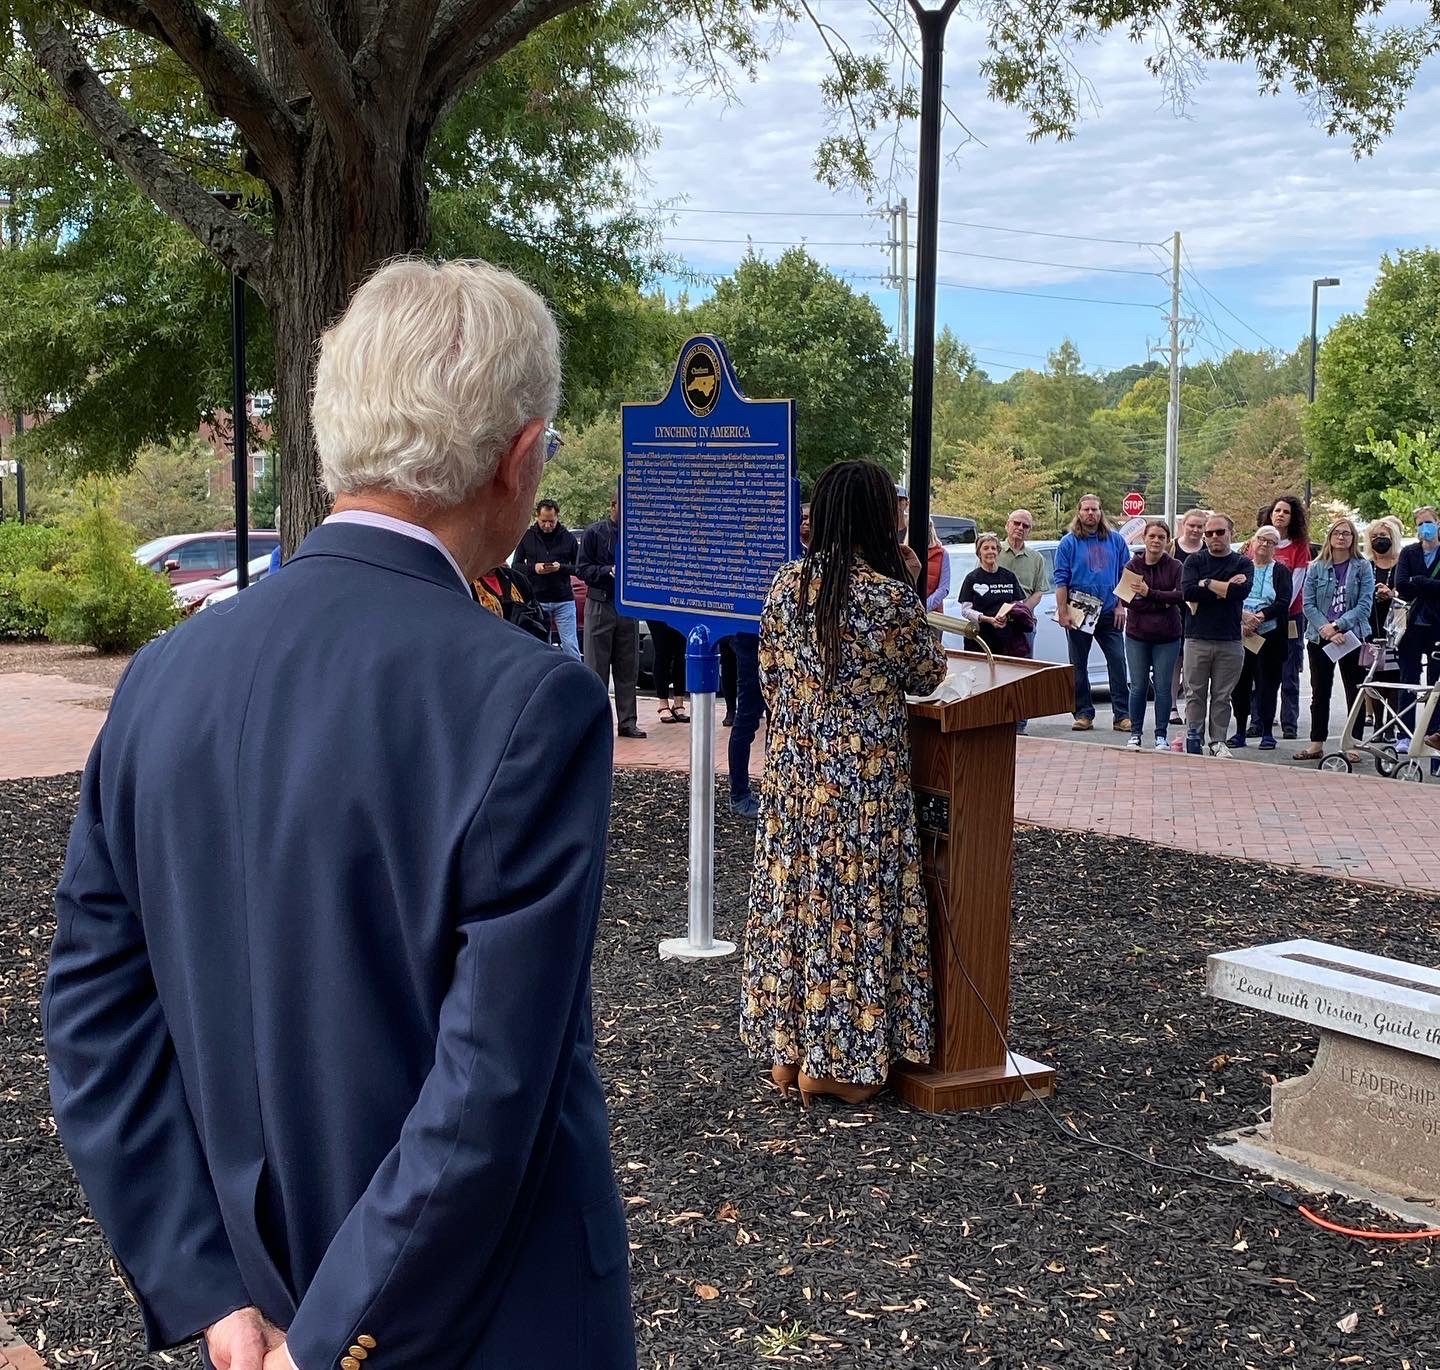 Bob Pearson of Pittsboro, who helped organize CRC-C and led the effort to place the memorial marker, watches as Chatham County Commissioner Karen Howard receives it on behalf of the county.